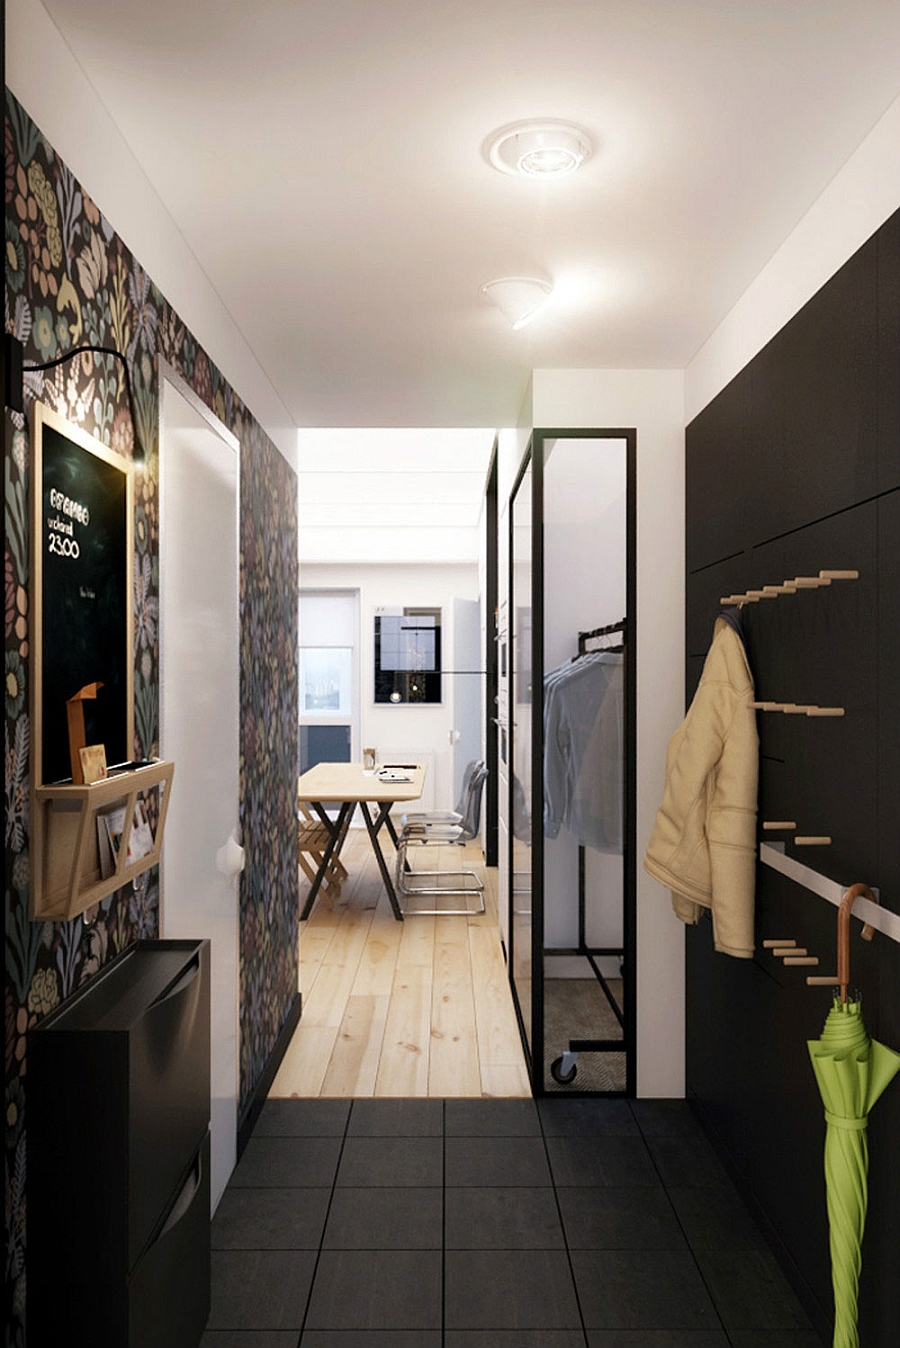 Tiny Apartment In Black And White Charms With Space-Saving Design